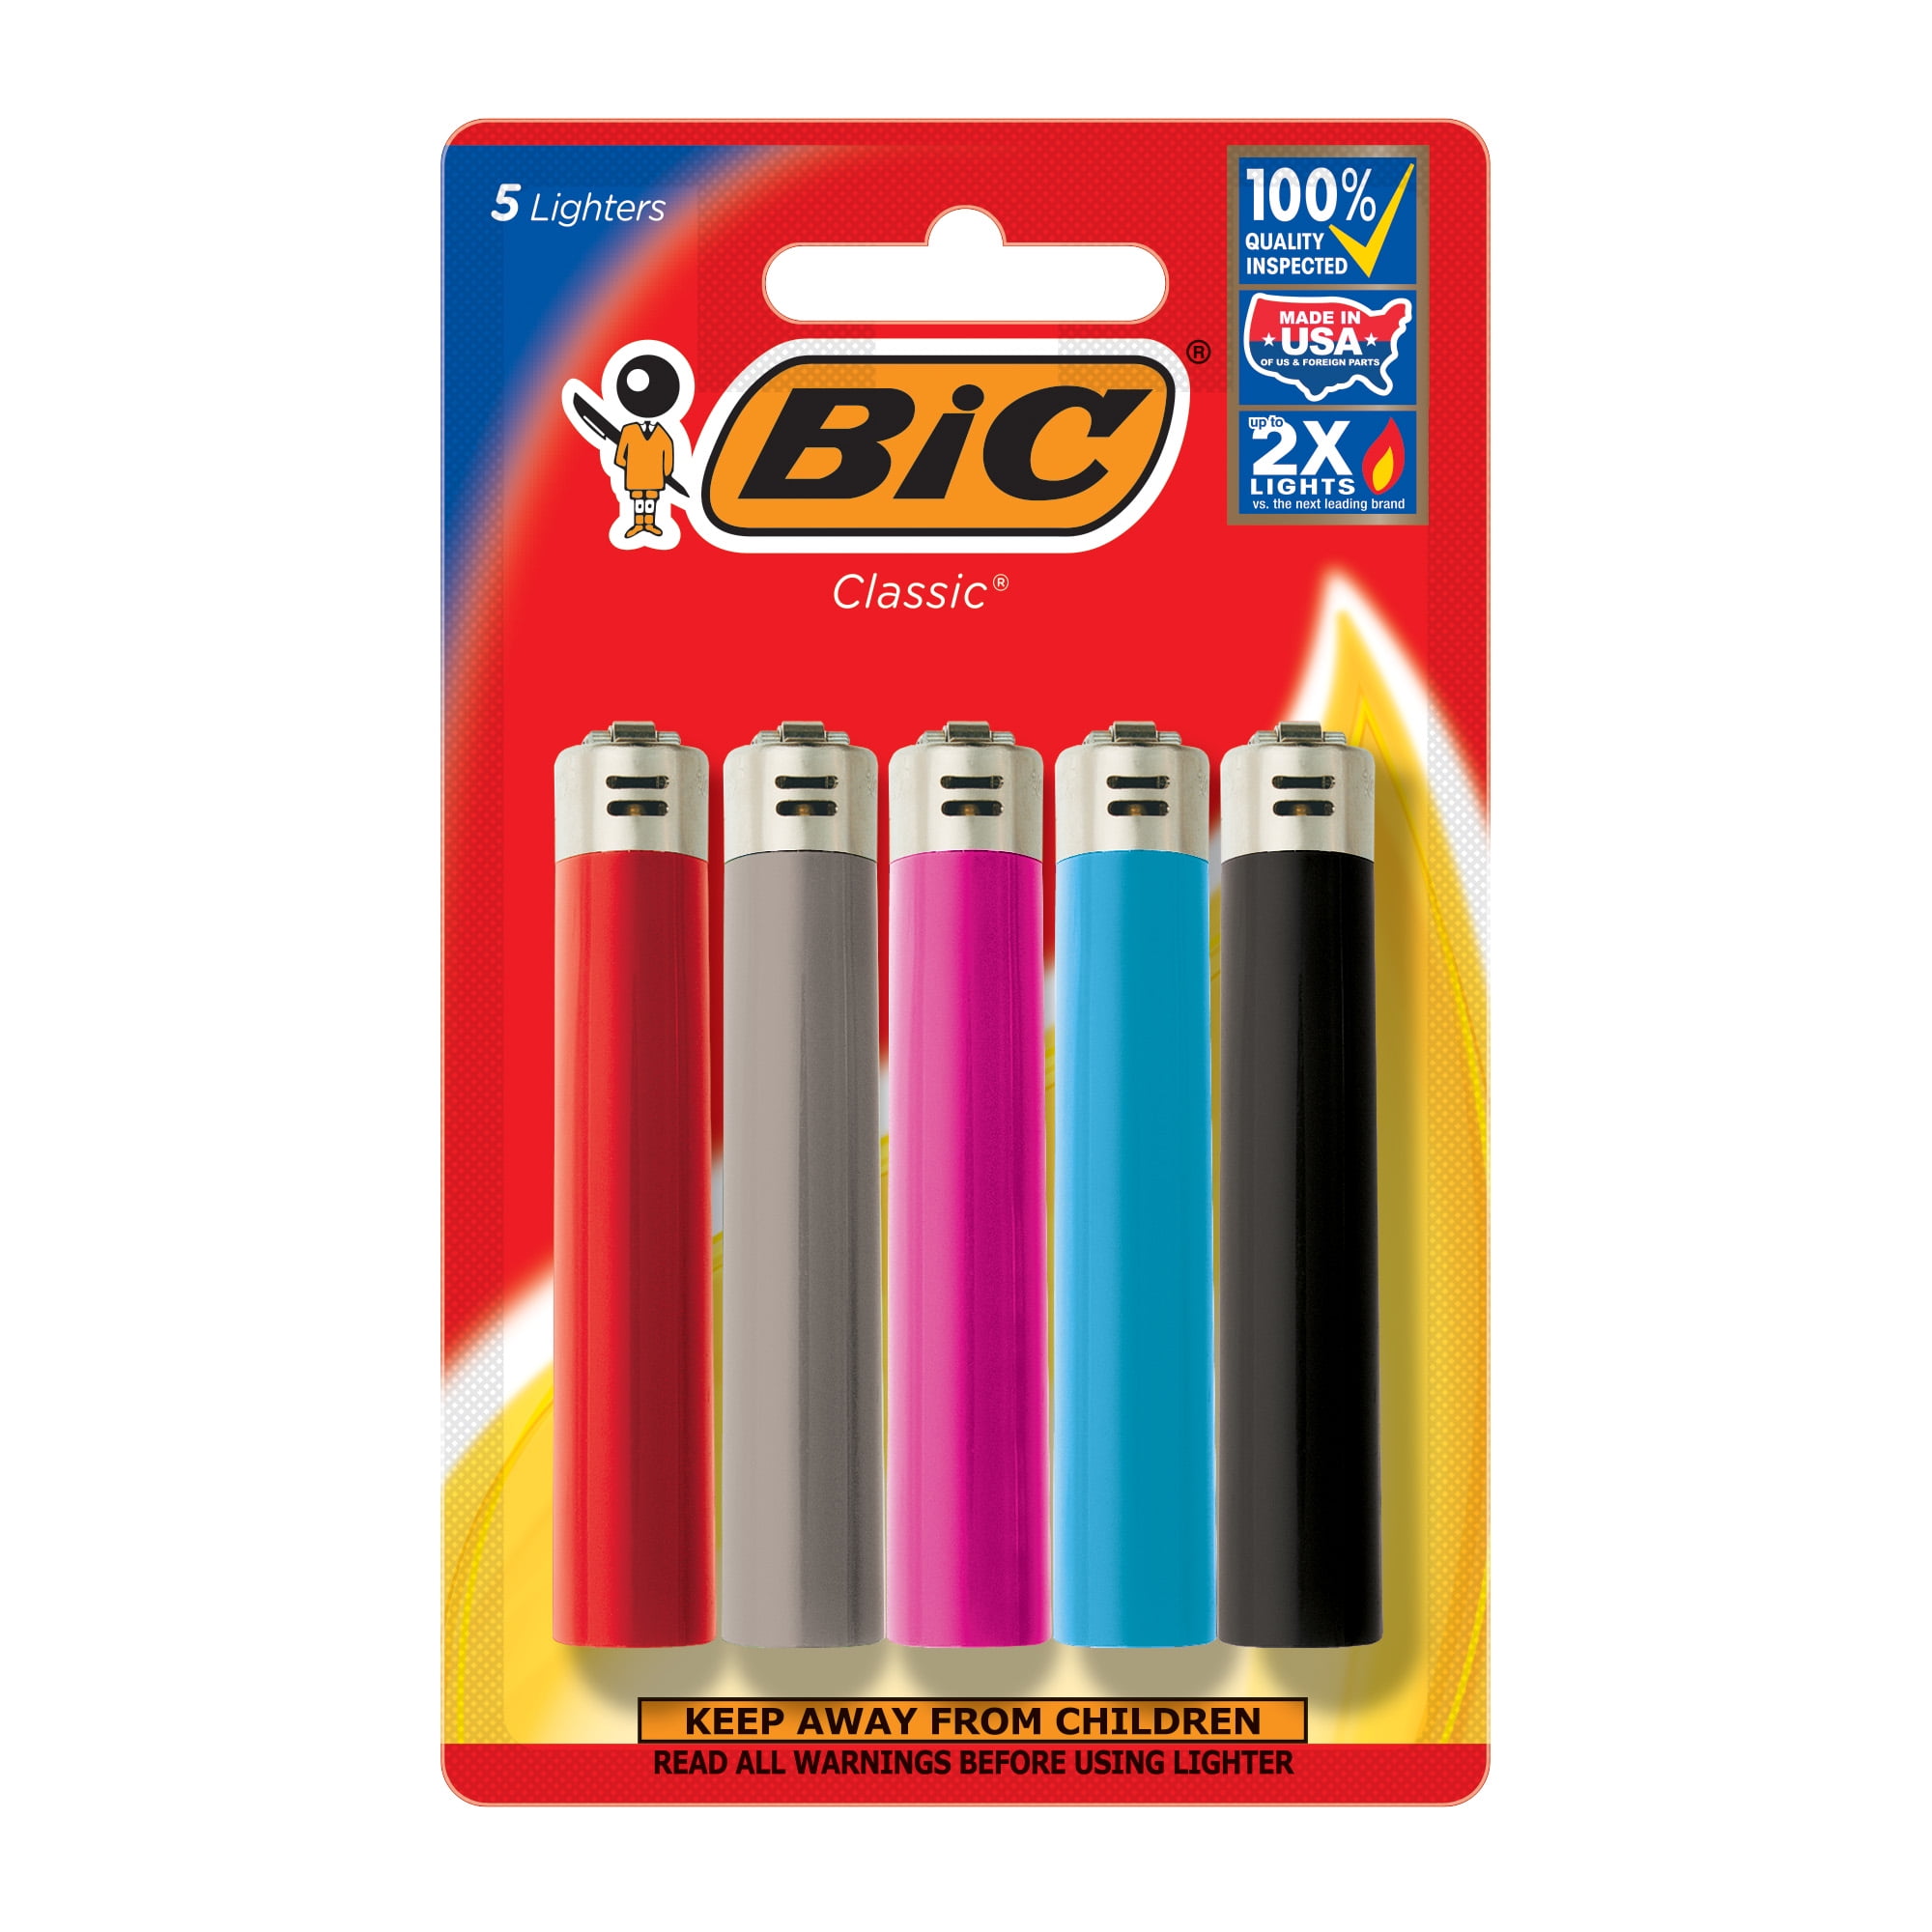 BIC Classic Pocket Lighter, Assorted Colors - Pack of 5 Lighters (Colors May Vary)